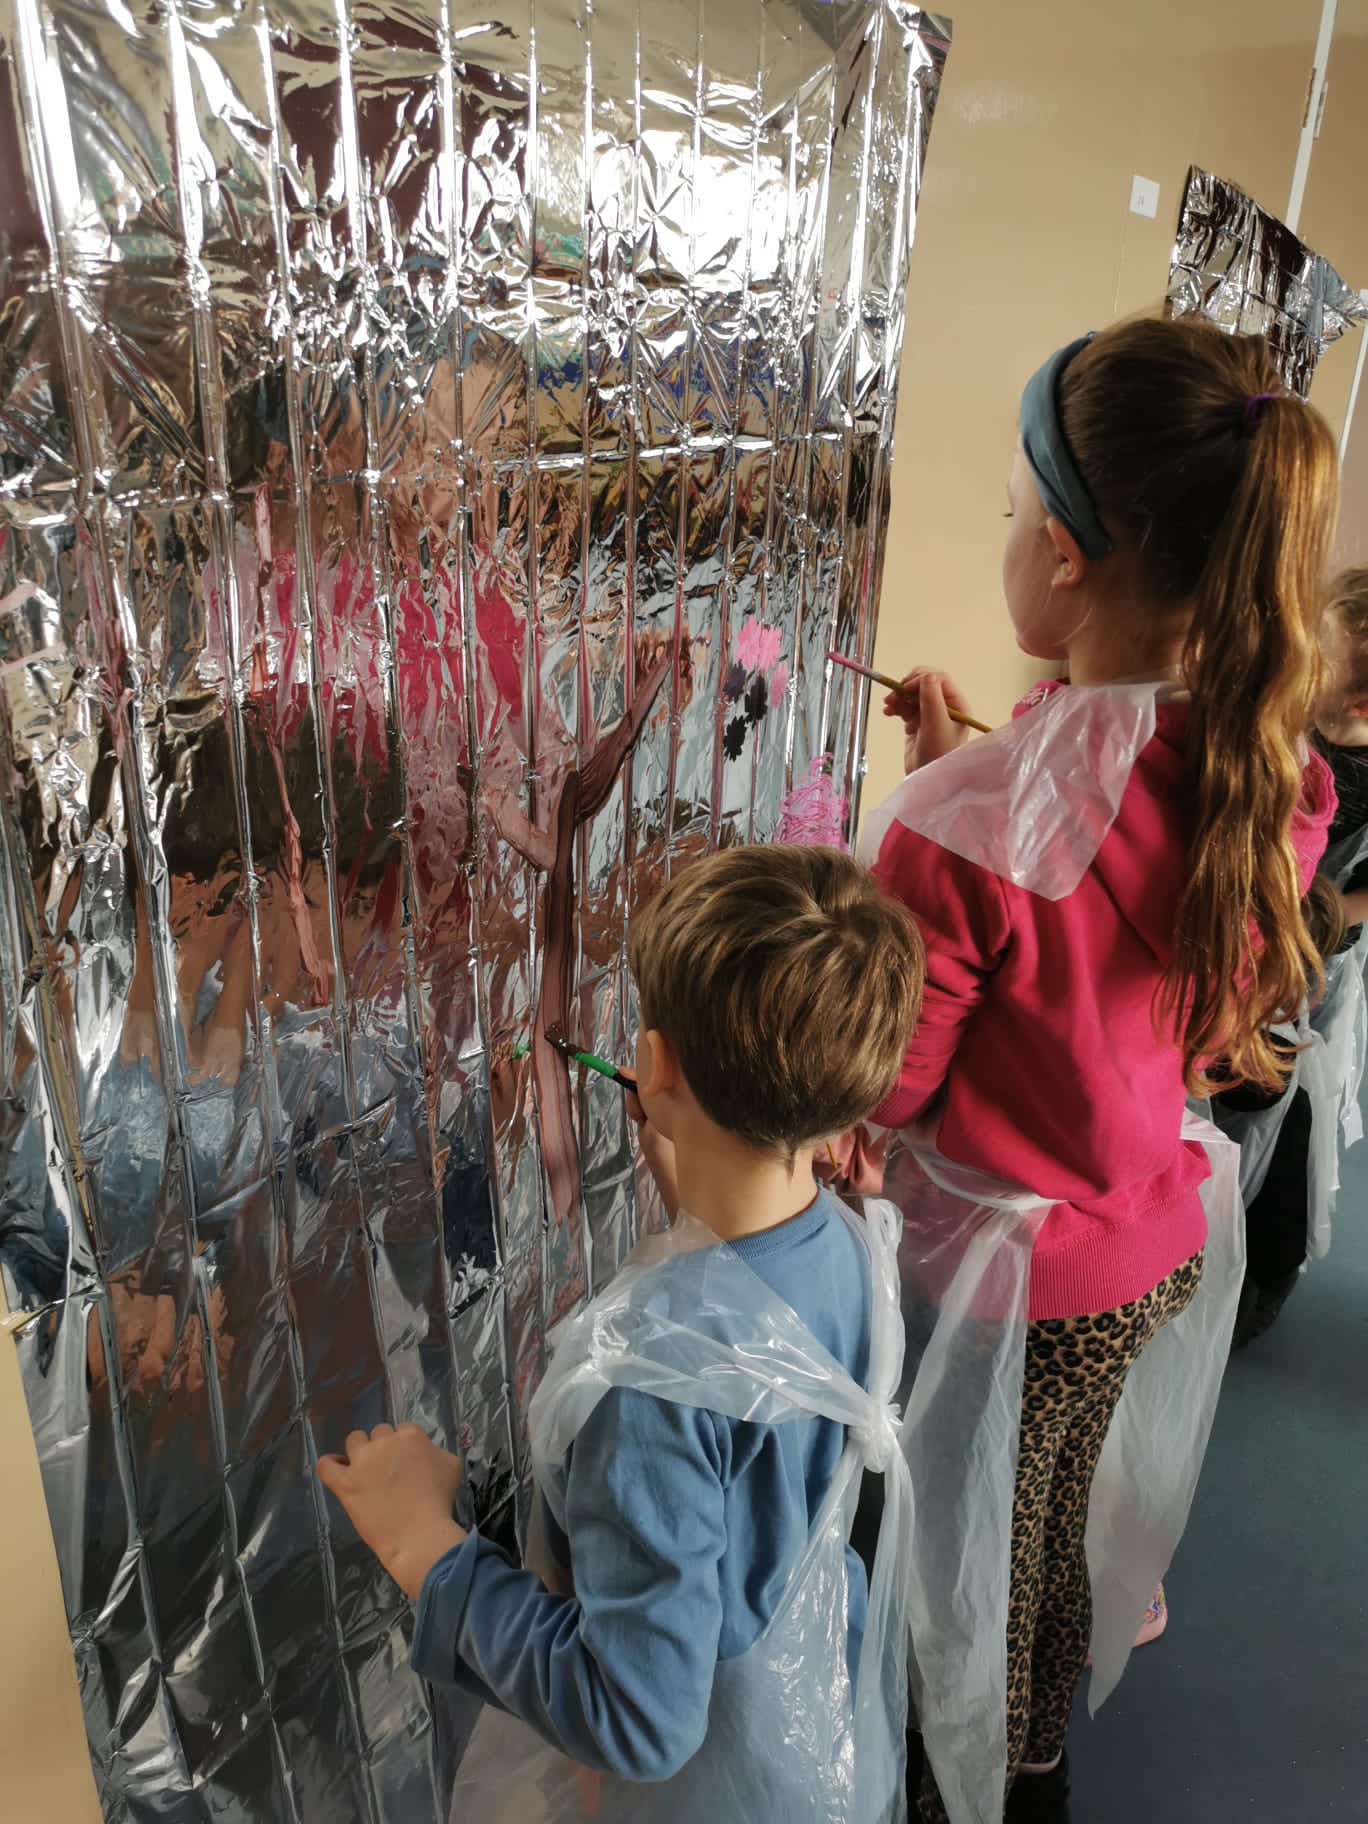 A boy and girl painting on silver foil hanging on a wall